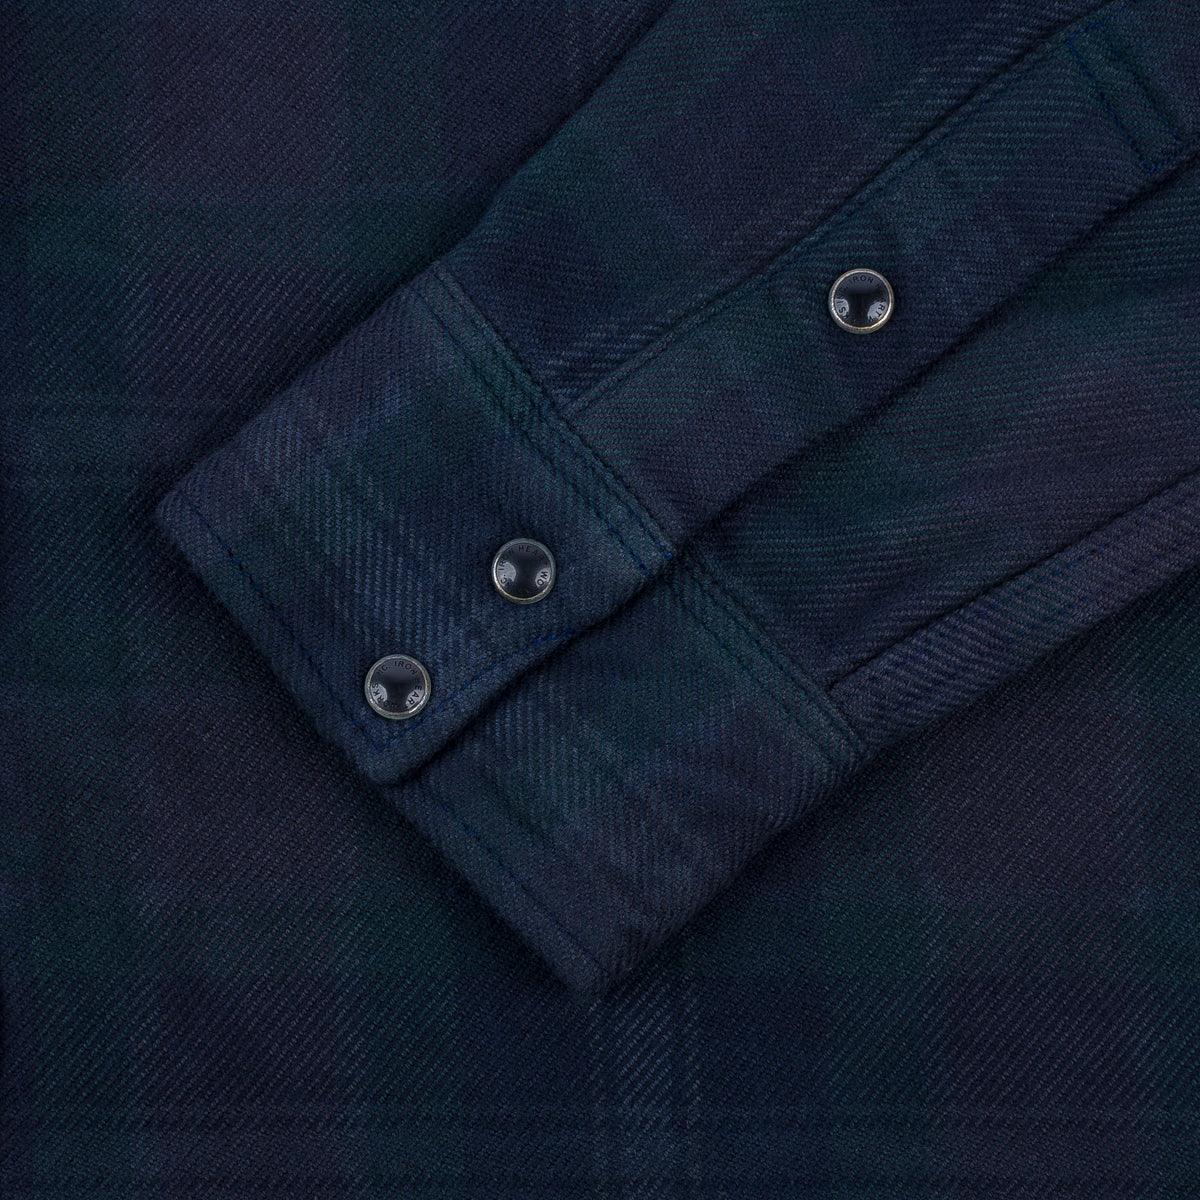 Image showing the IHSH-336-OD - Ultra Heavy Flannel Crazy Check Western Shirt - Navy Overdyed Black which is a Shirts described by the following info Iron Heart, New, Released, Shirts, Tops and sold on the IRON HEART GERMANY online store